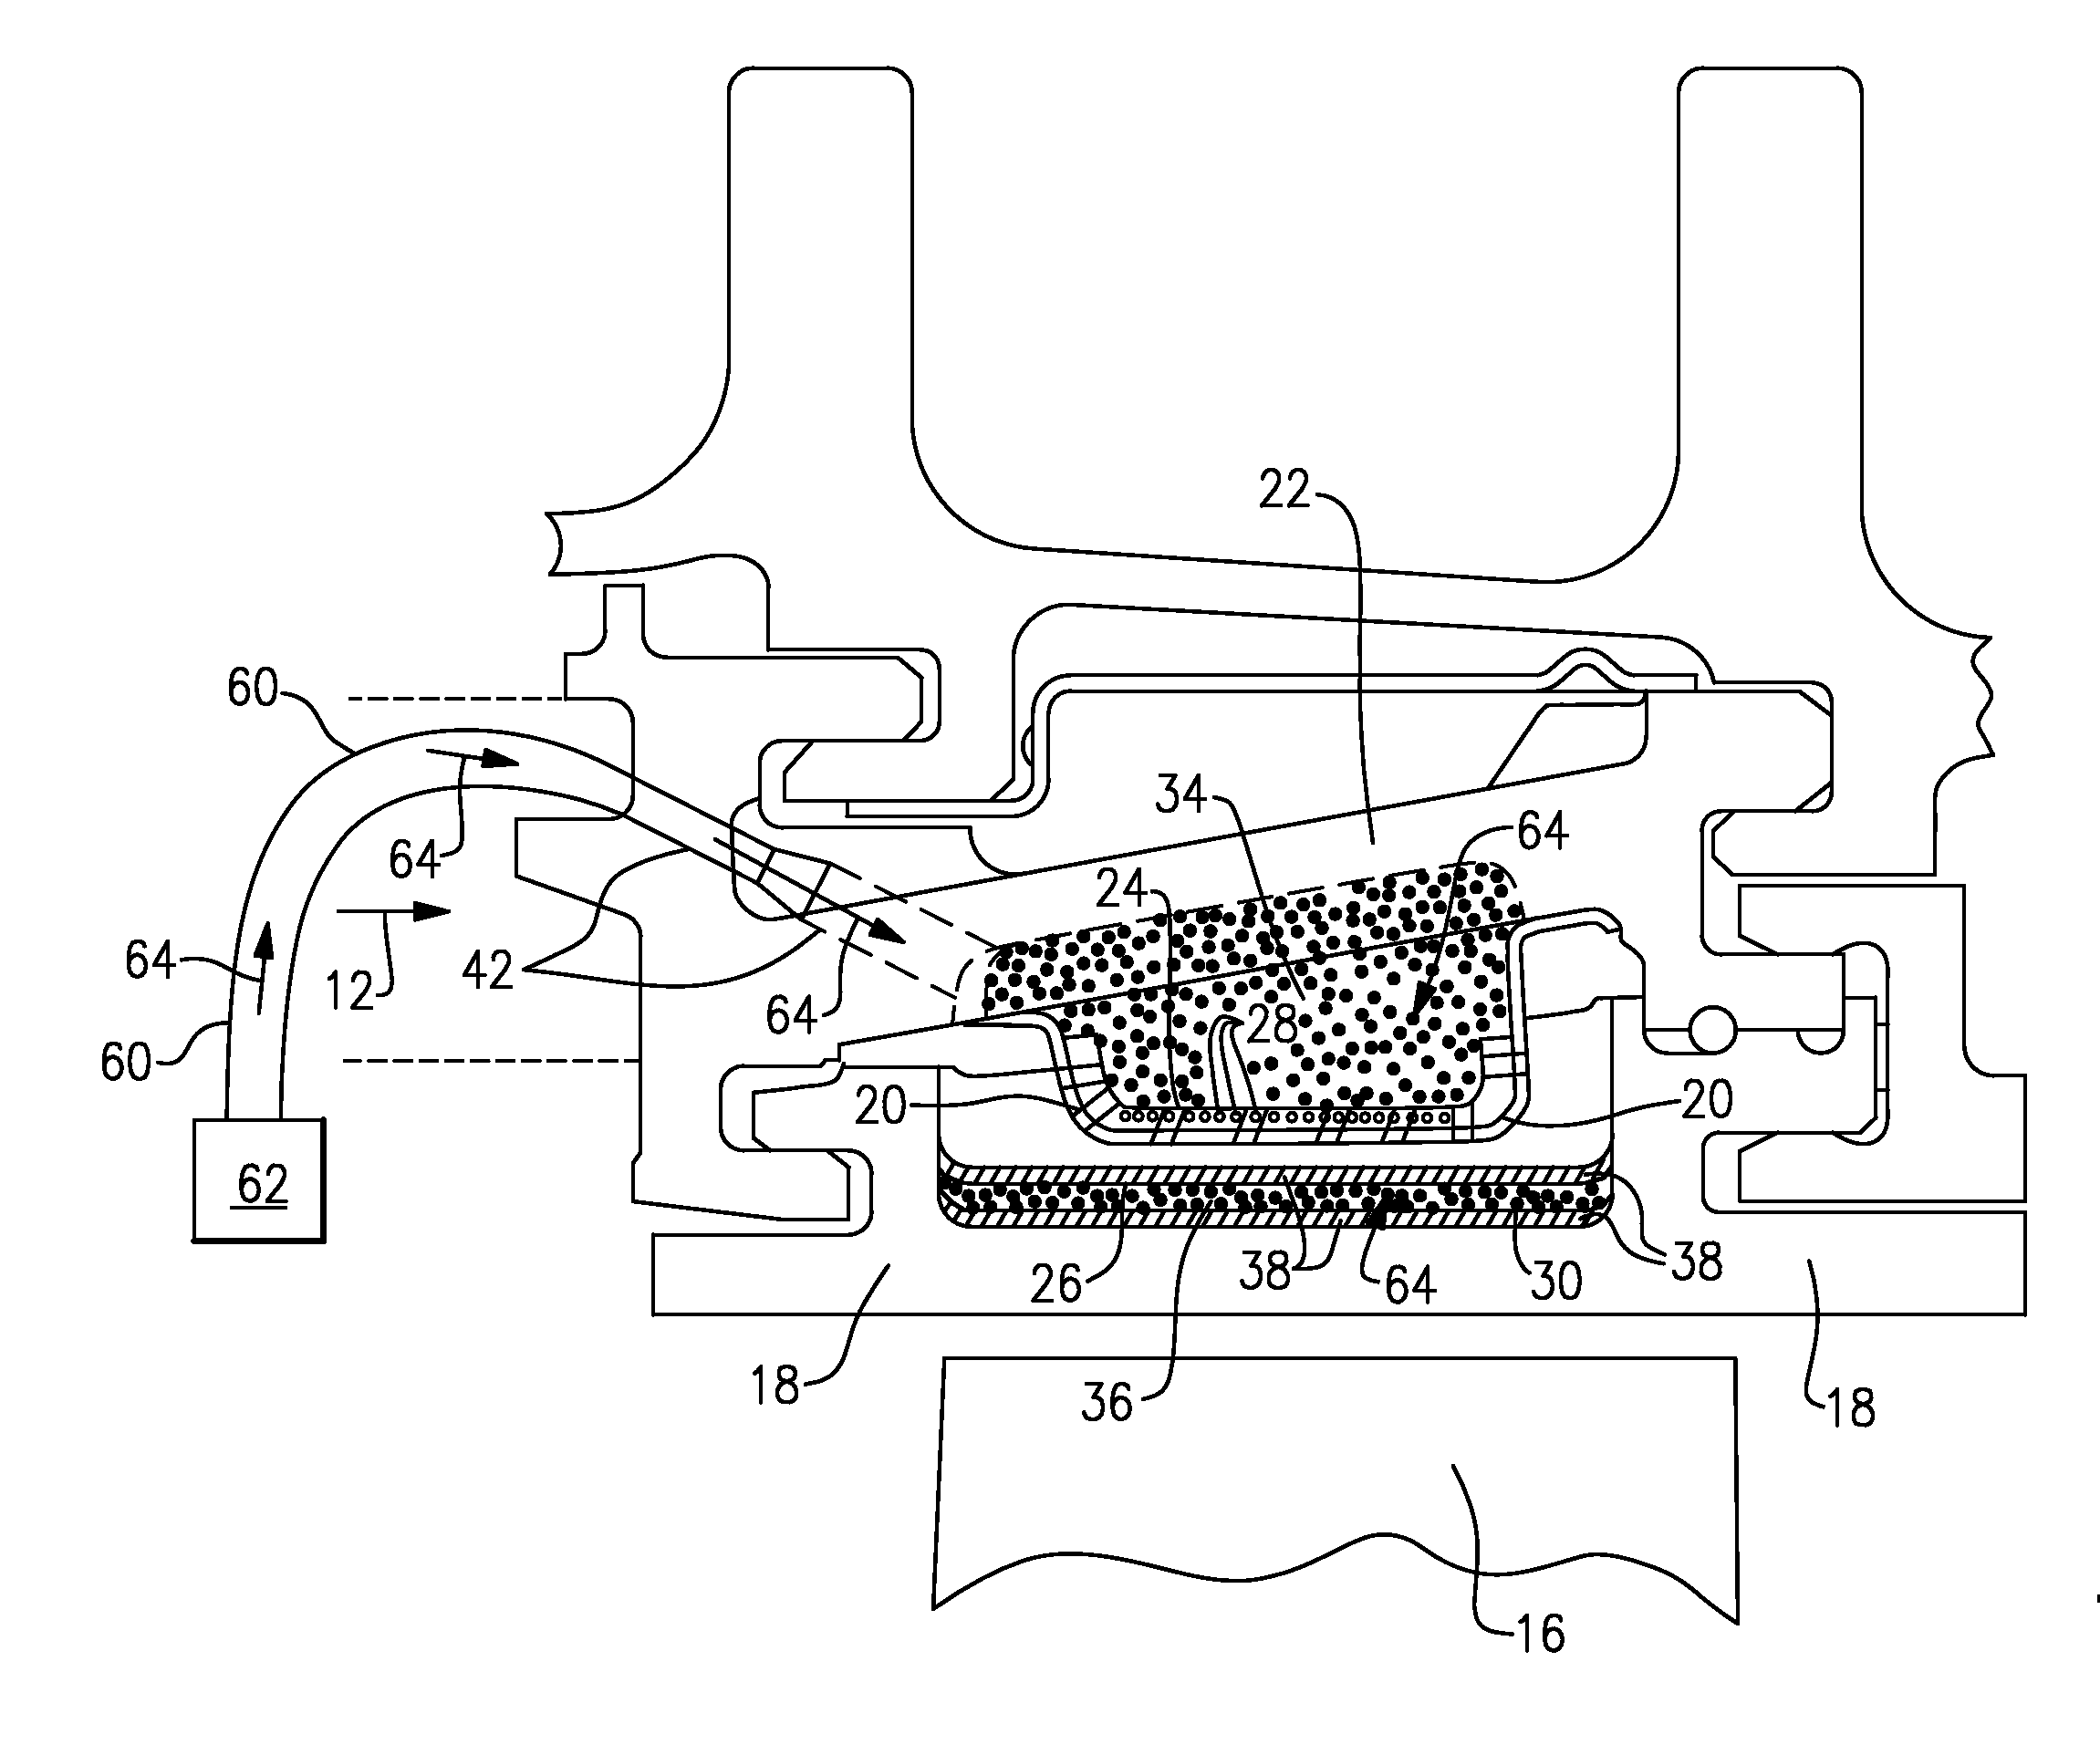 Detergent delivery methods and systems for turbine engines